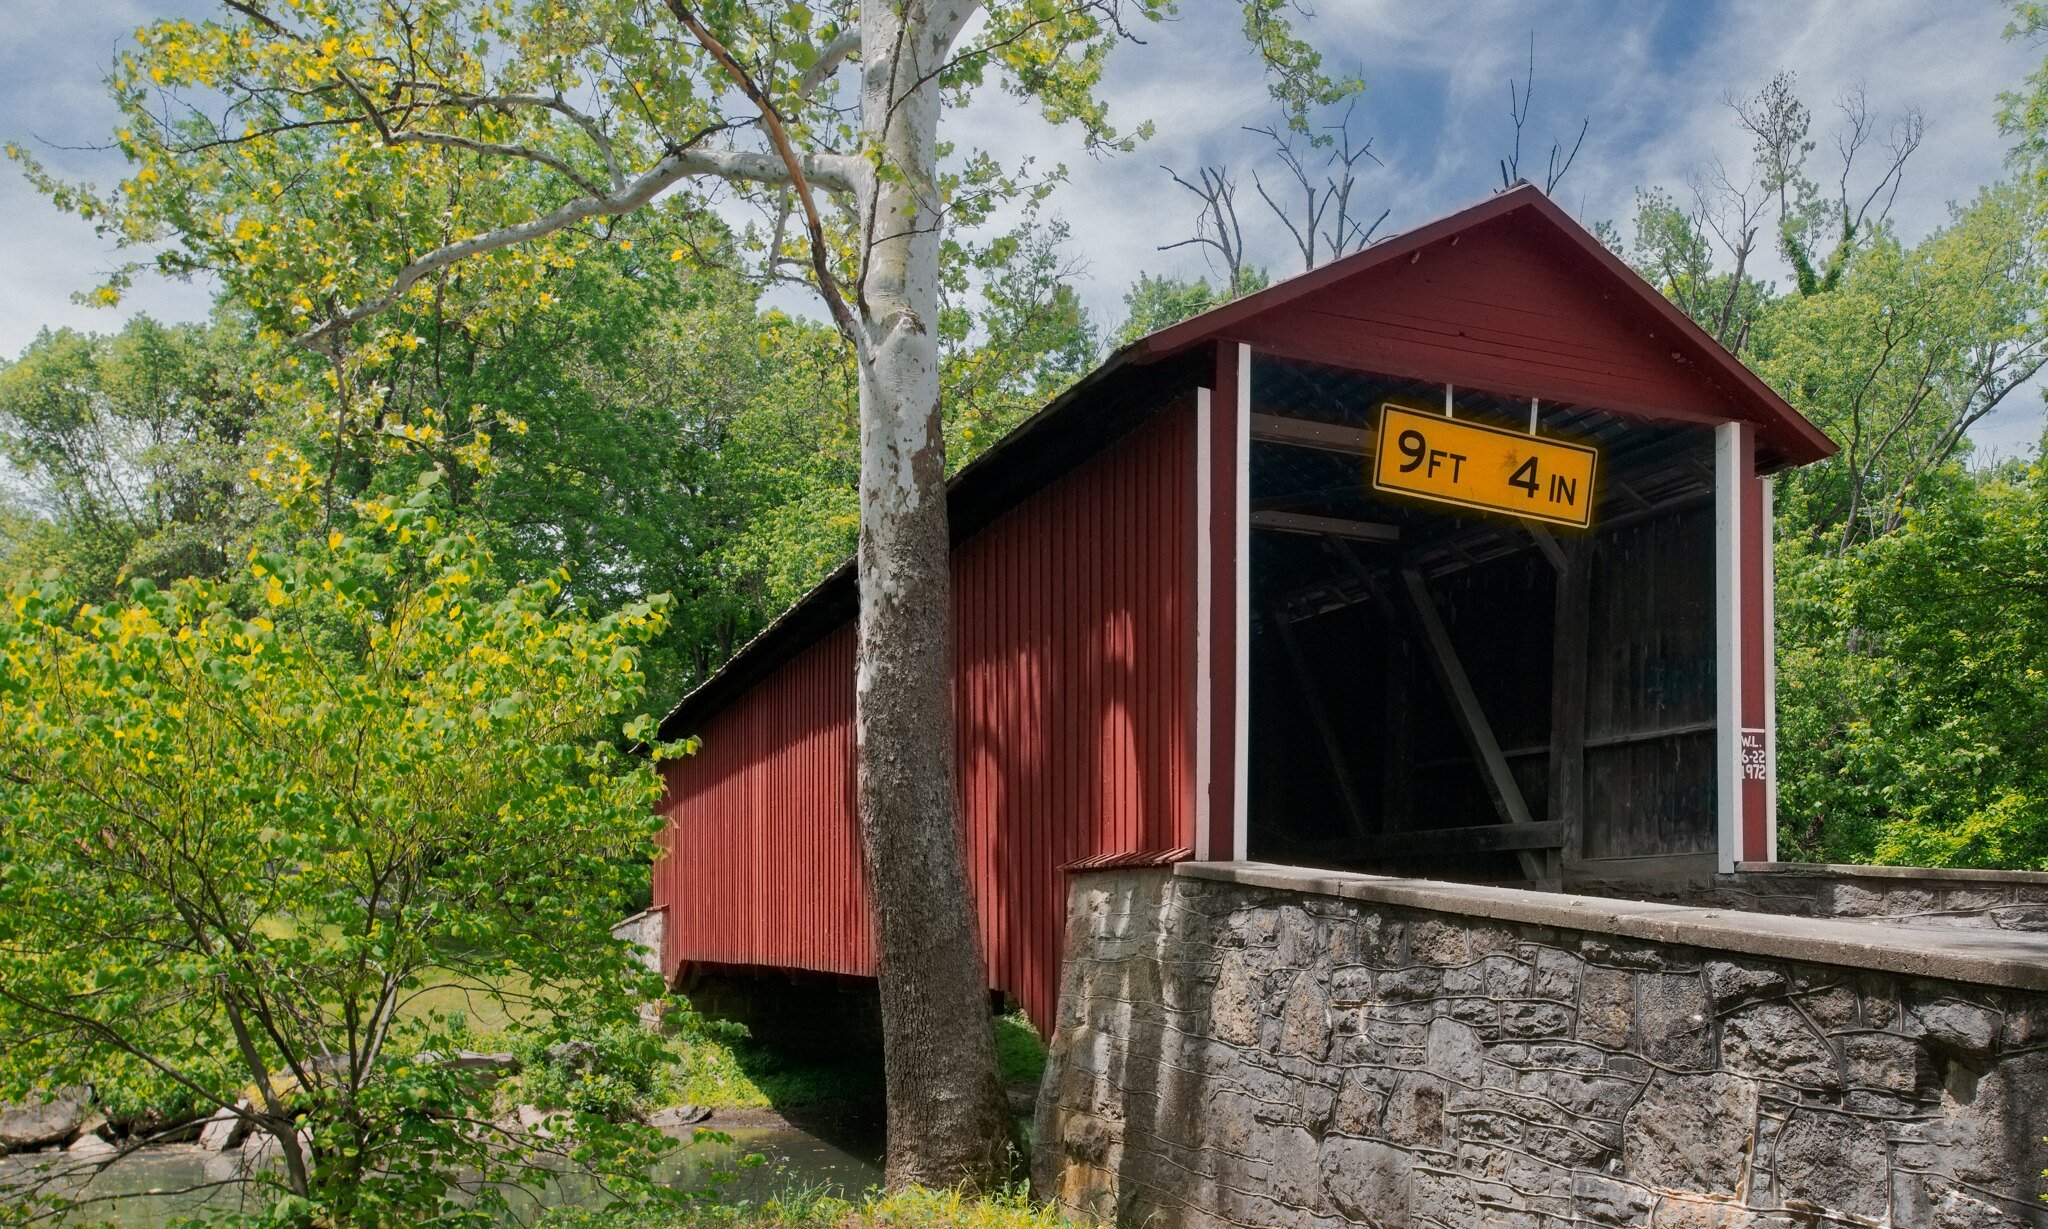  Witherspoon Covered Bridge in Montgomery Township, Franklin County, PA.  Built in 1883. 